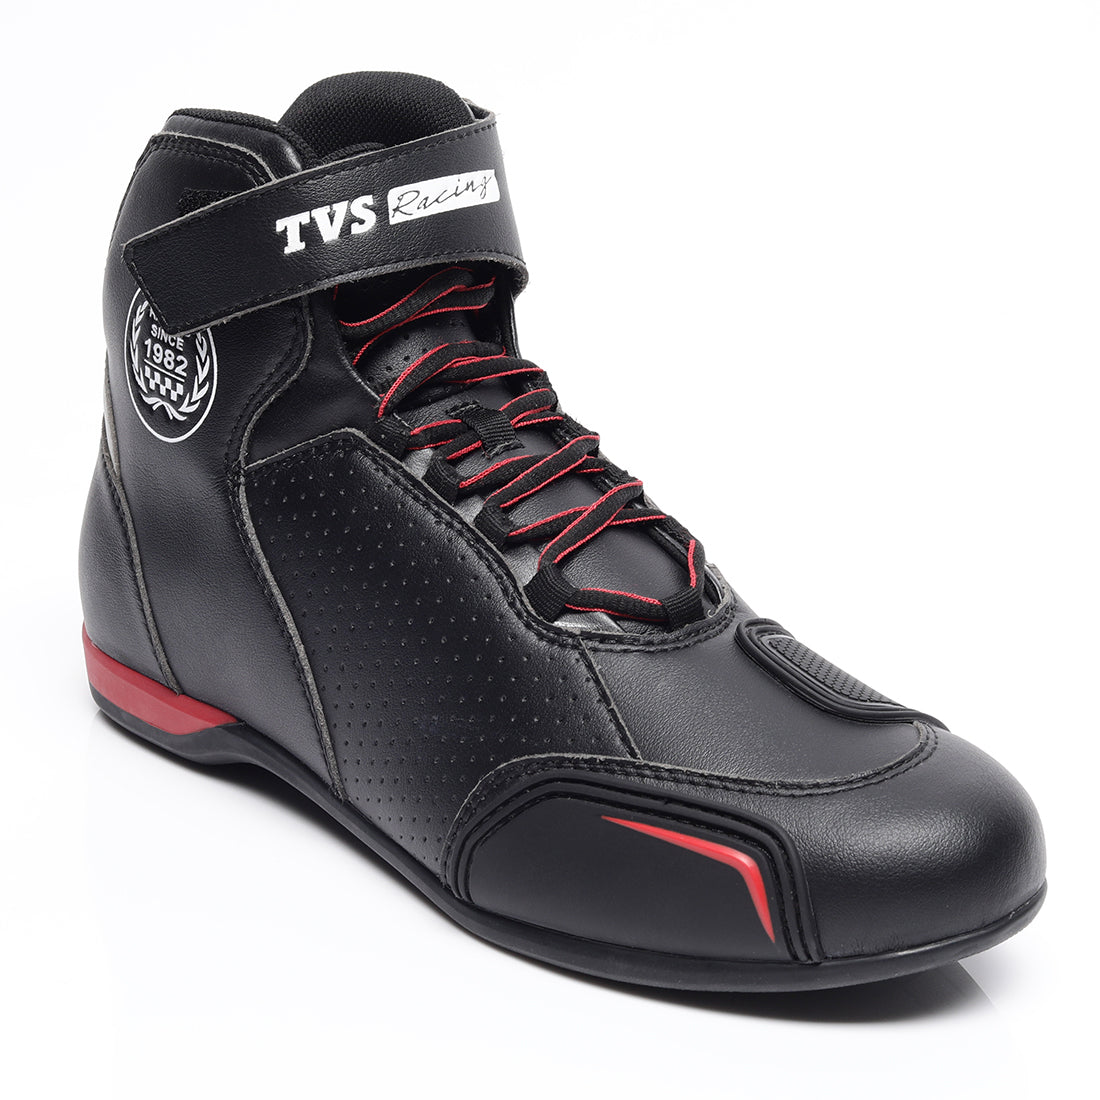  TVS Racing Ankle Length Riding Boots for Men:Anti-Microbial & Waterproof Riding Shoes with Reflective Panels, Ventilated Biker Boots with Ankle-Toe Protection-Premium Men's Riding Boots (Black)